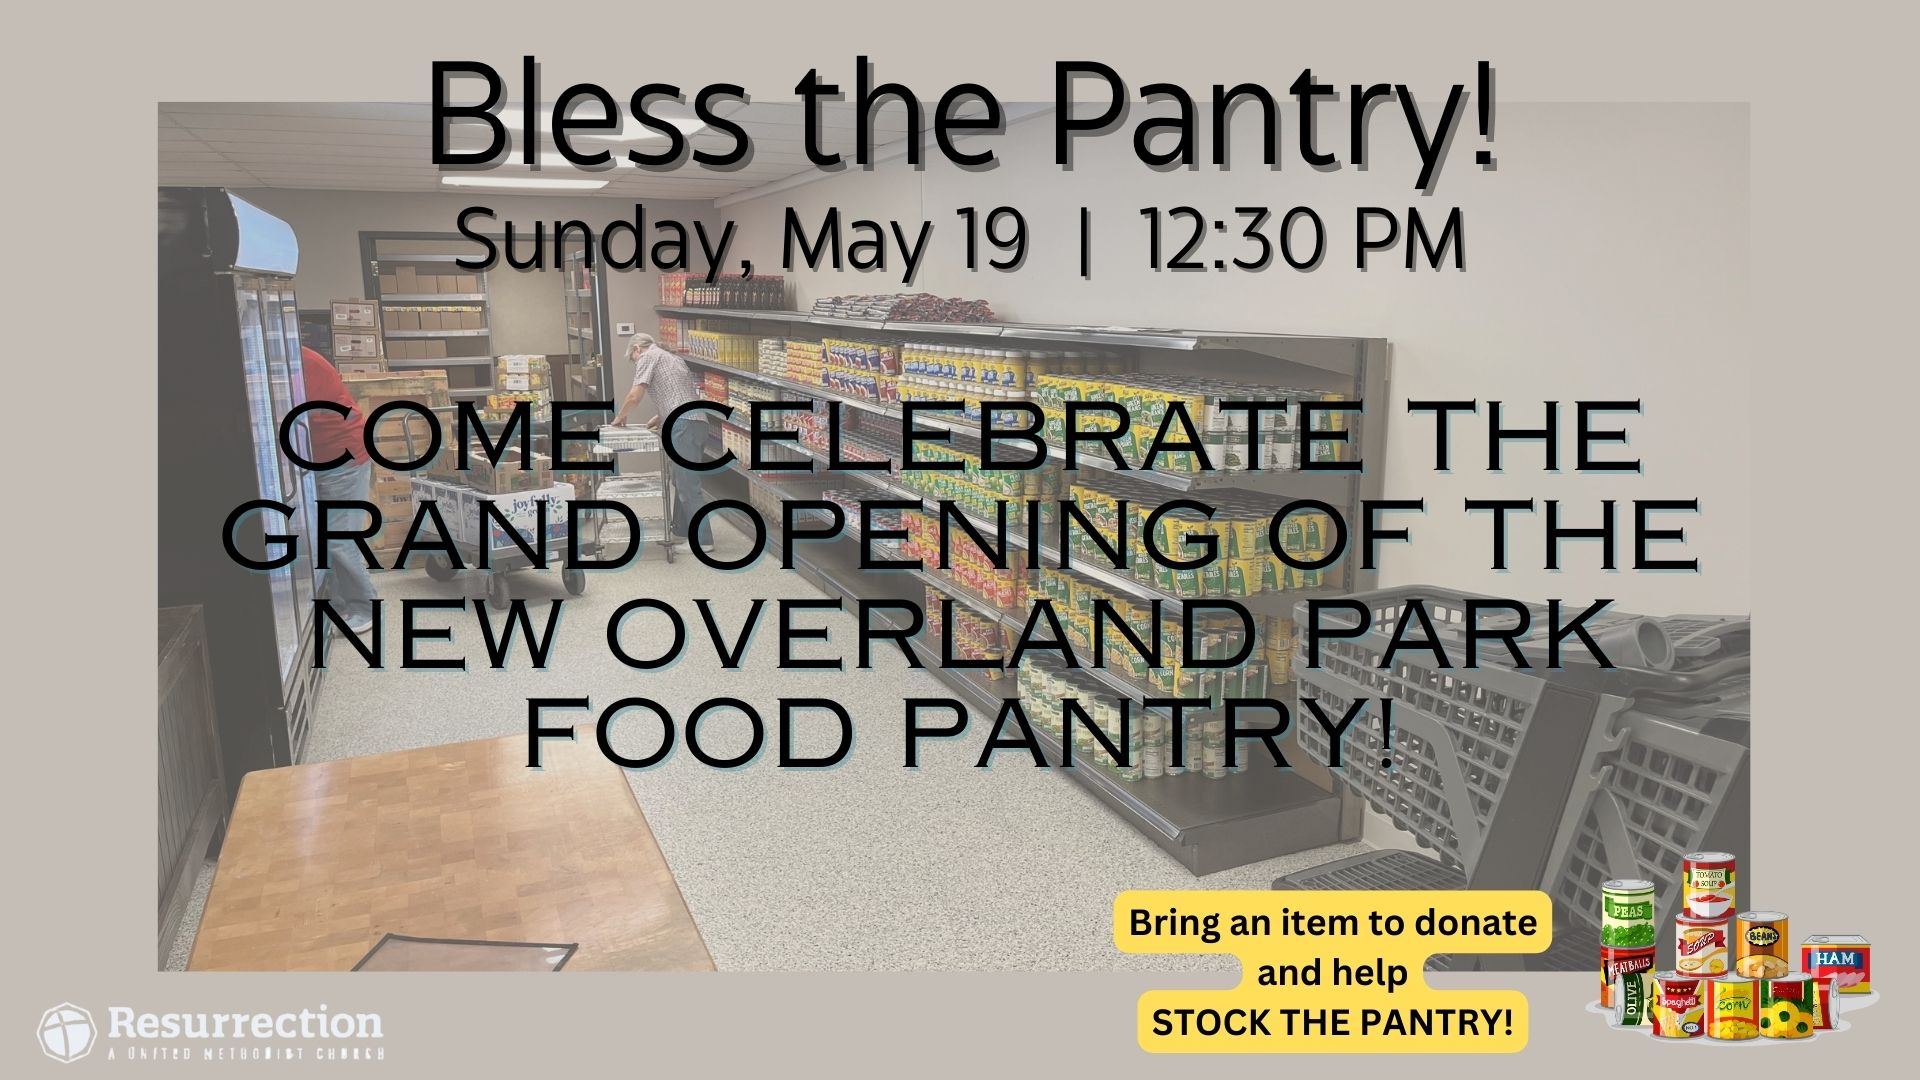 Come celebrate the Grand Opening of the NEW Overland Park Food Pantry! (2)